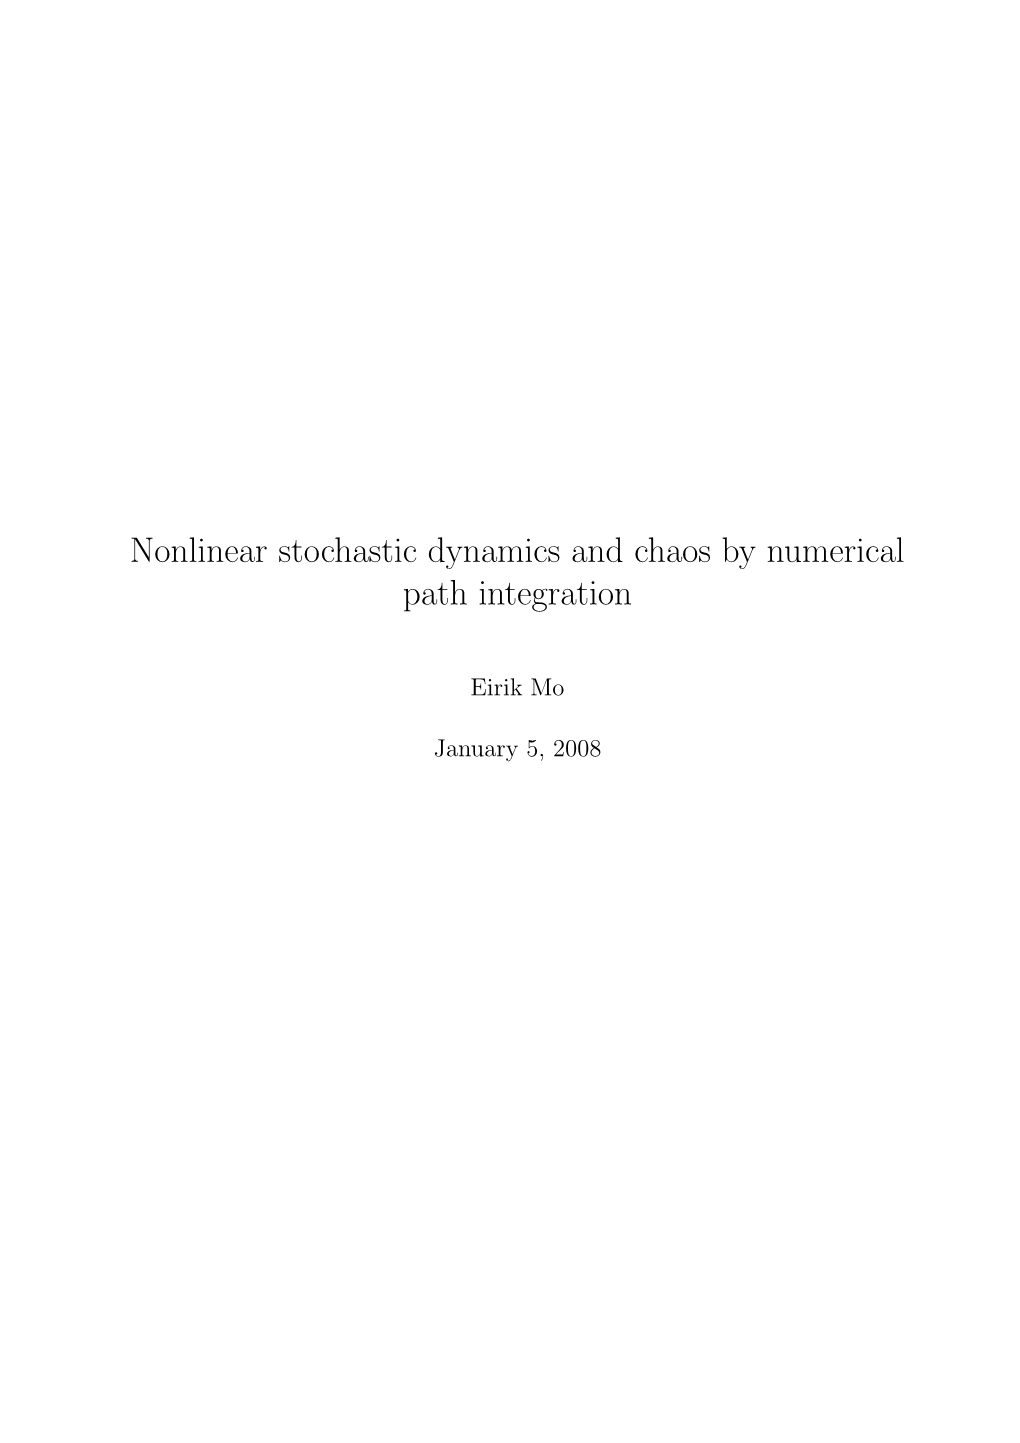 Nonlinear Stochastic Dynamics and Chaos by Numerical Path Integration